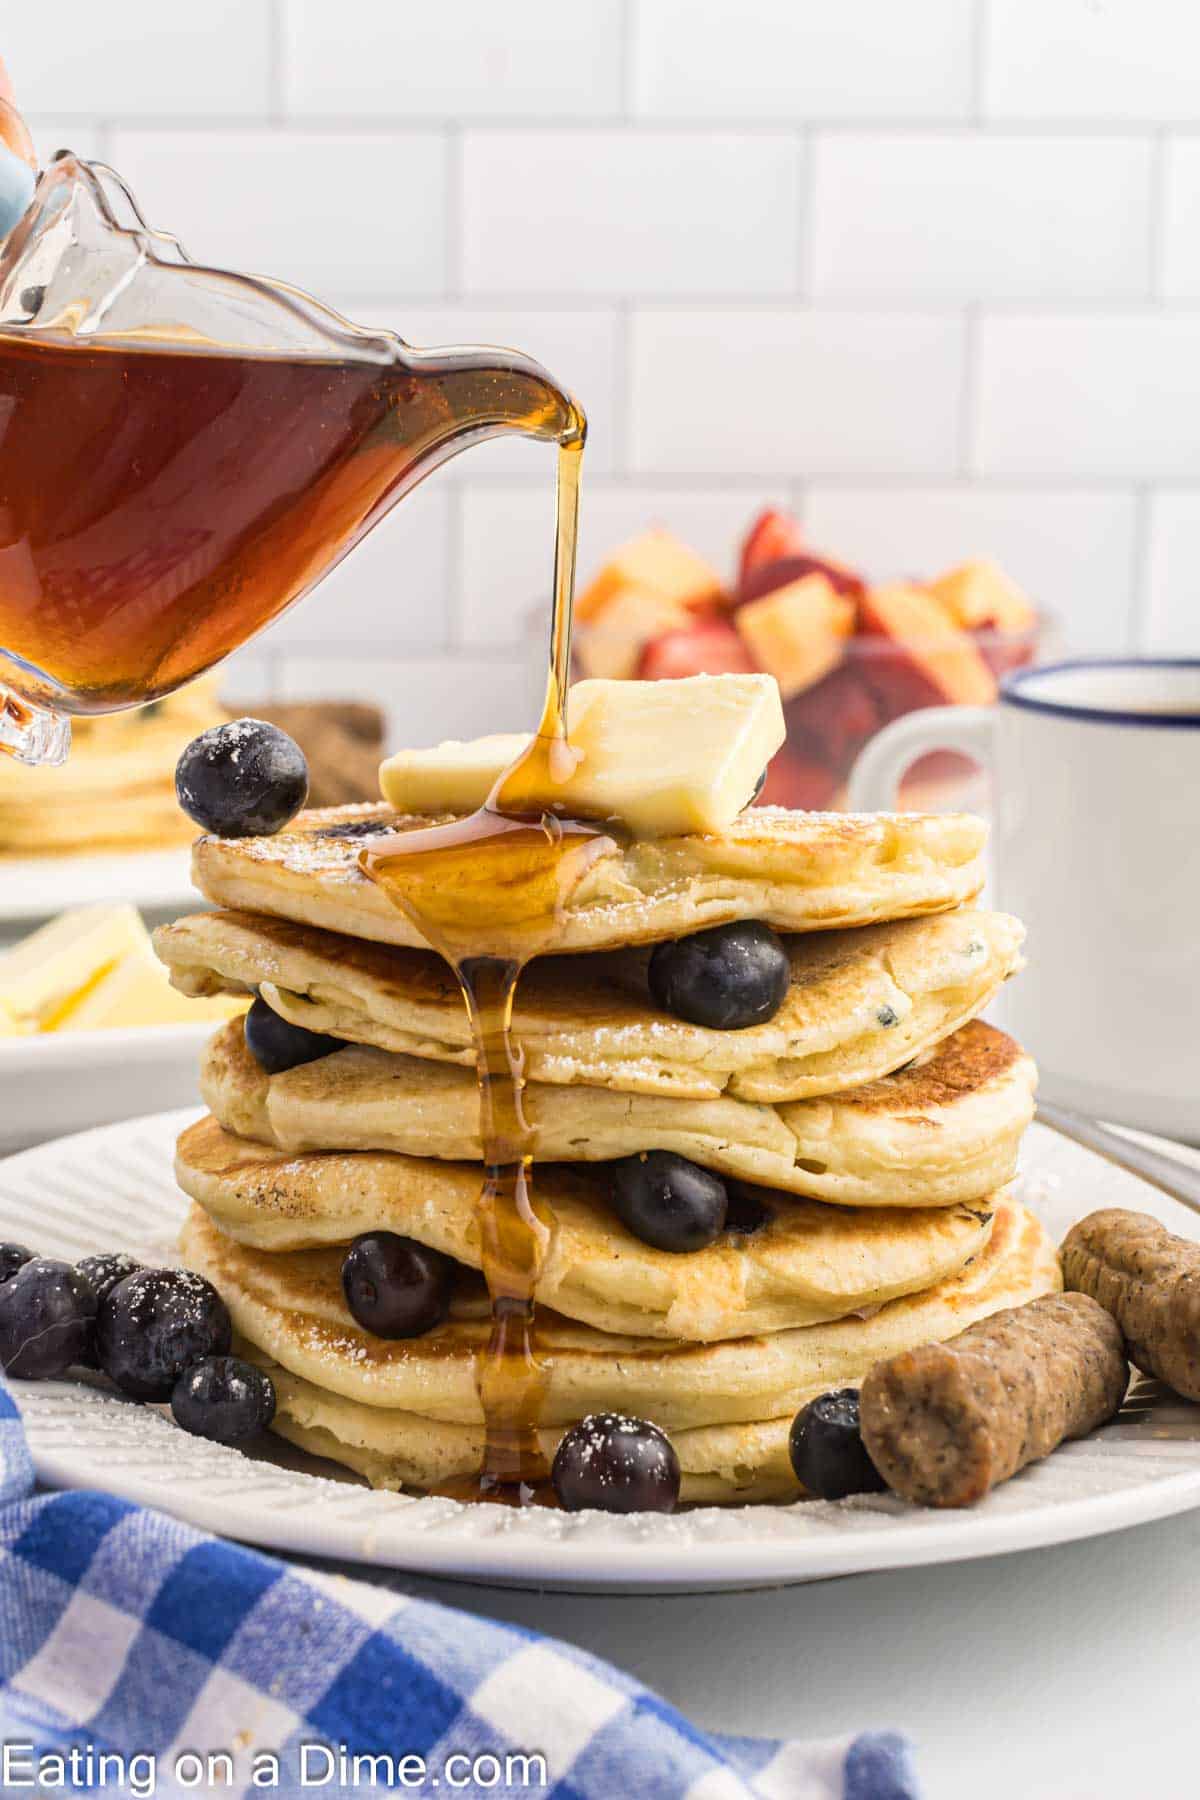 Syrup is being drizzled over the top of pancakes stacked on a plate with fresh blueberries